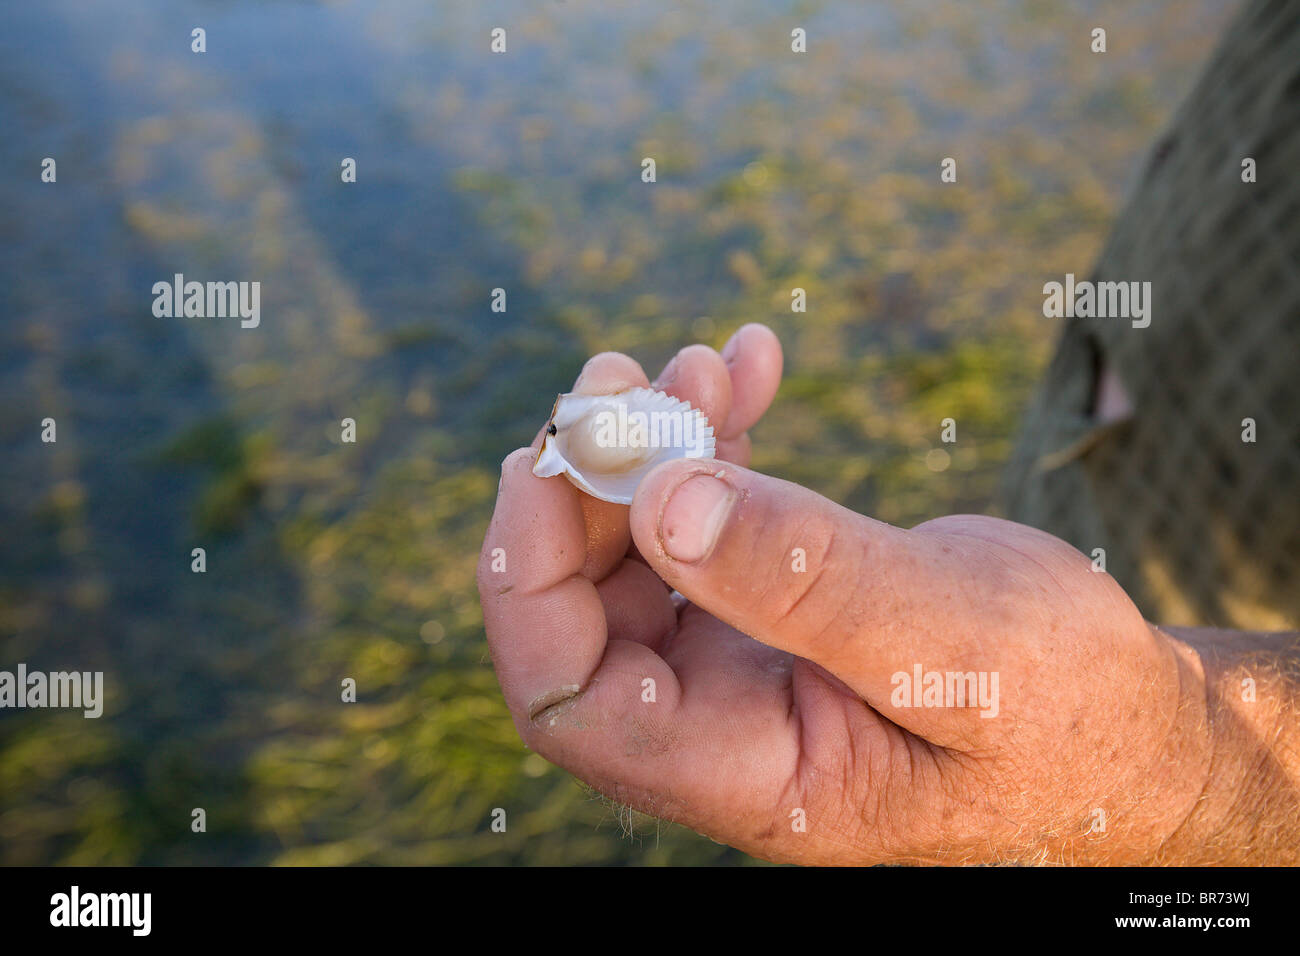 Human hand holding onto a freshly opened Sea Scallop in the Gulf of Mexico Stock Photo